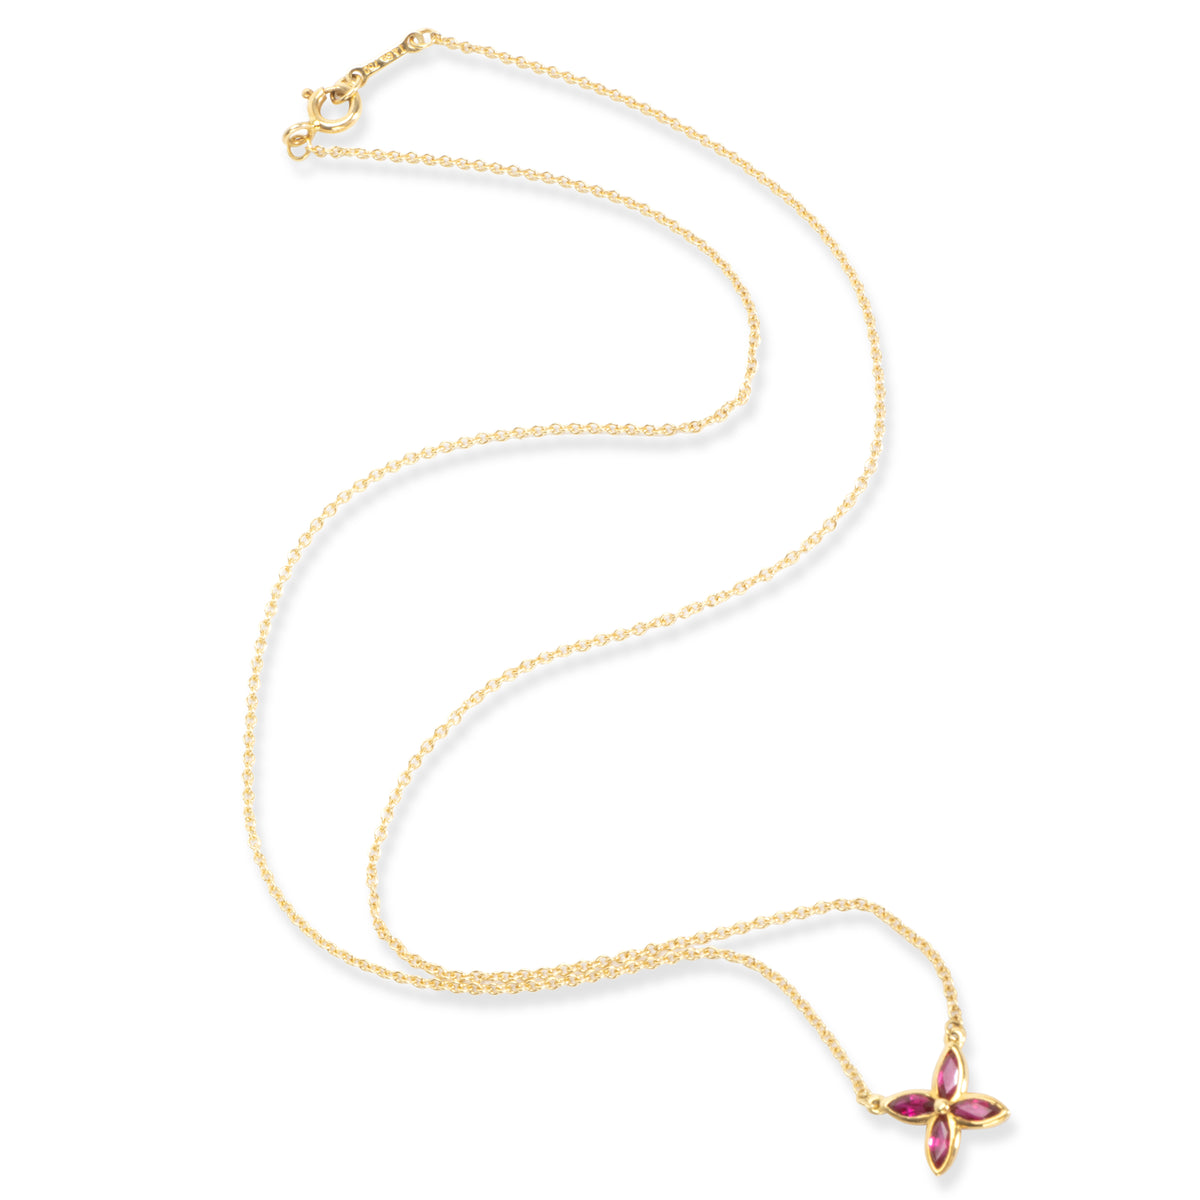 Tiffany & Co. Victoria Ruby Necklace in 18K Rose Gold